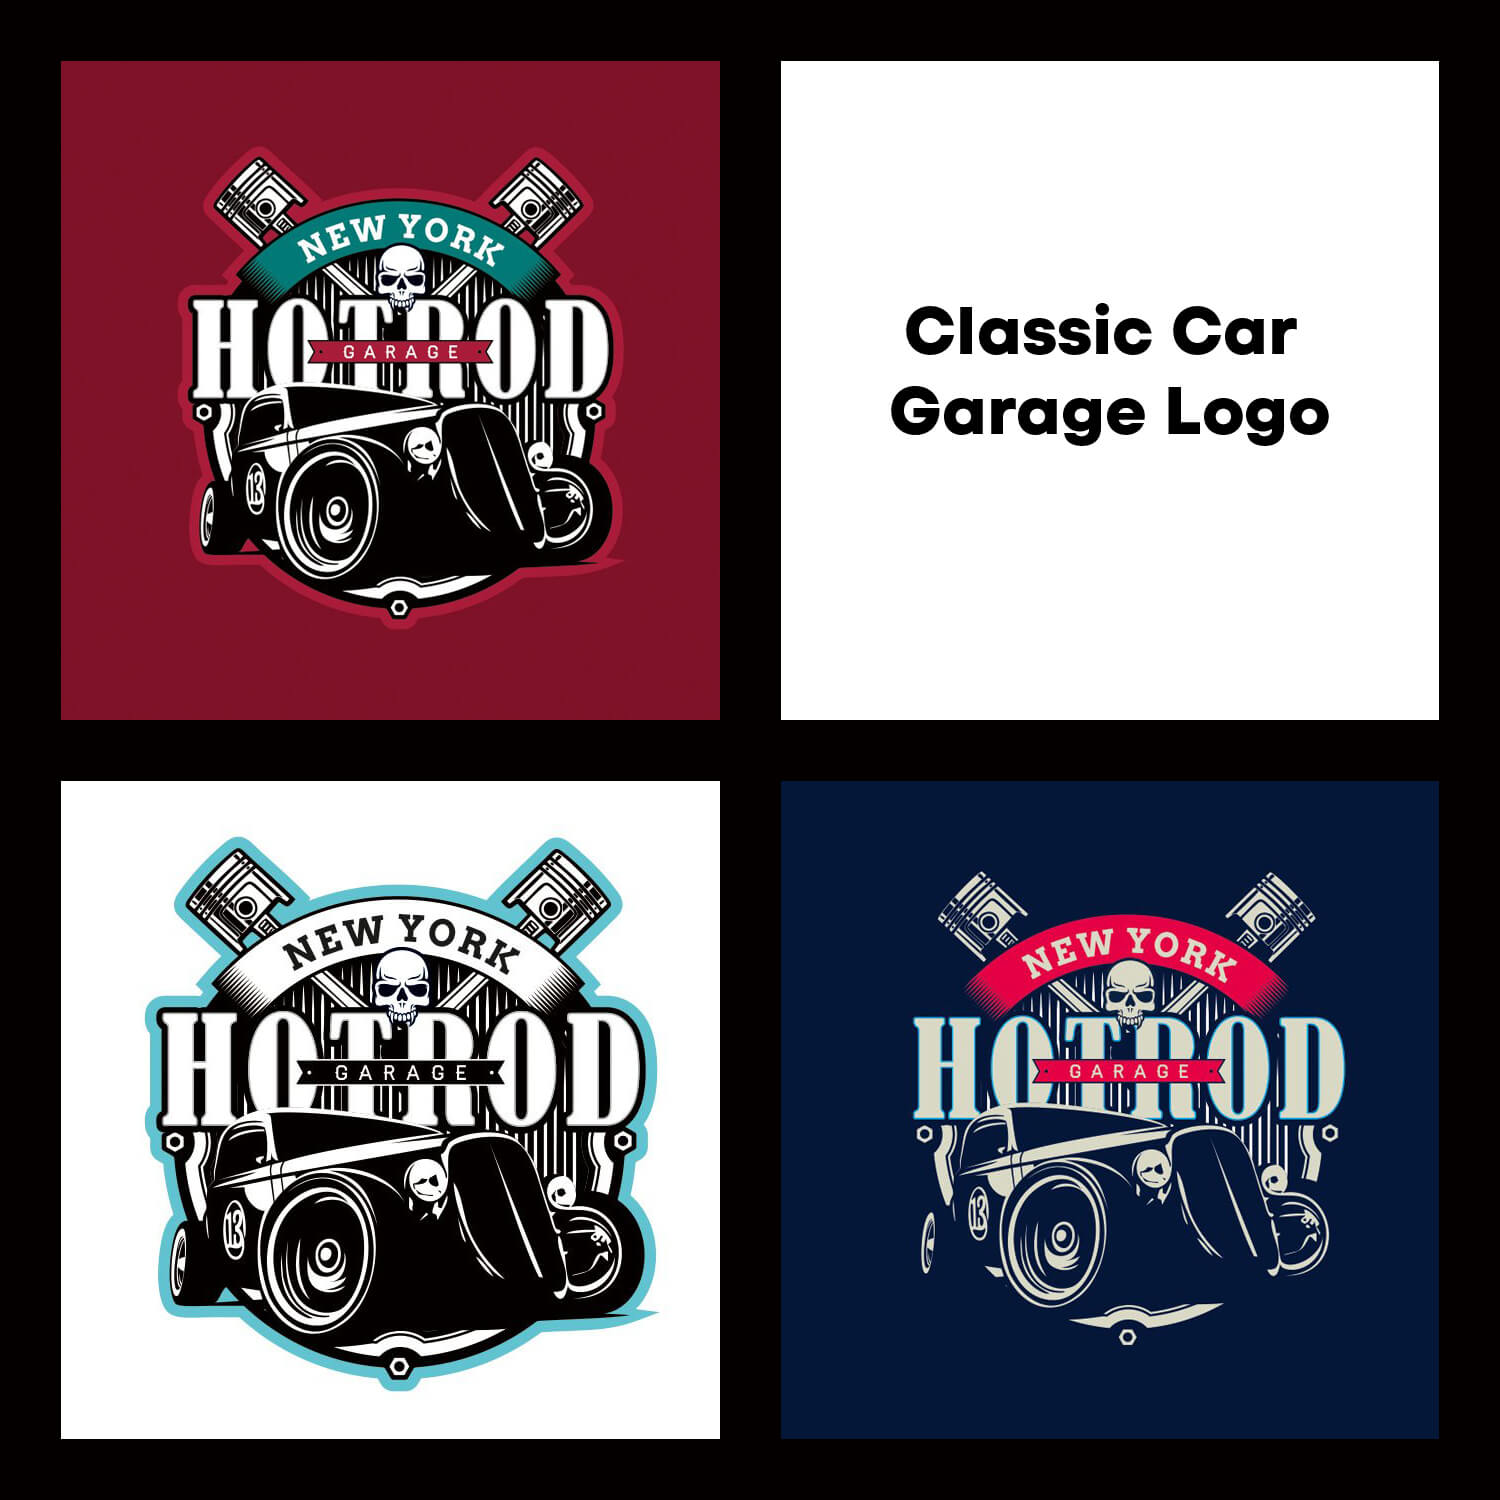 Car garage logos with pistons and skull on red, white and blue backgrounds.